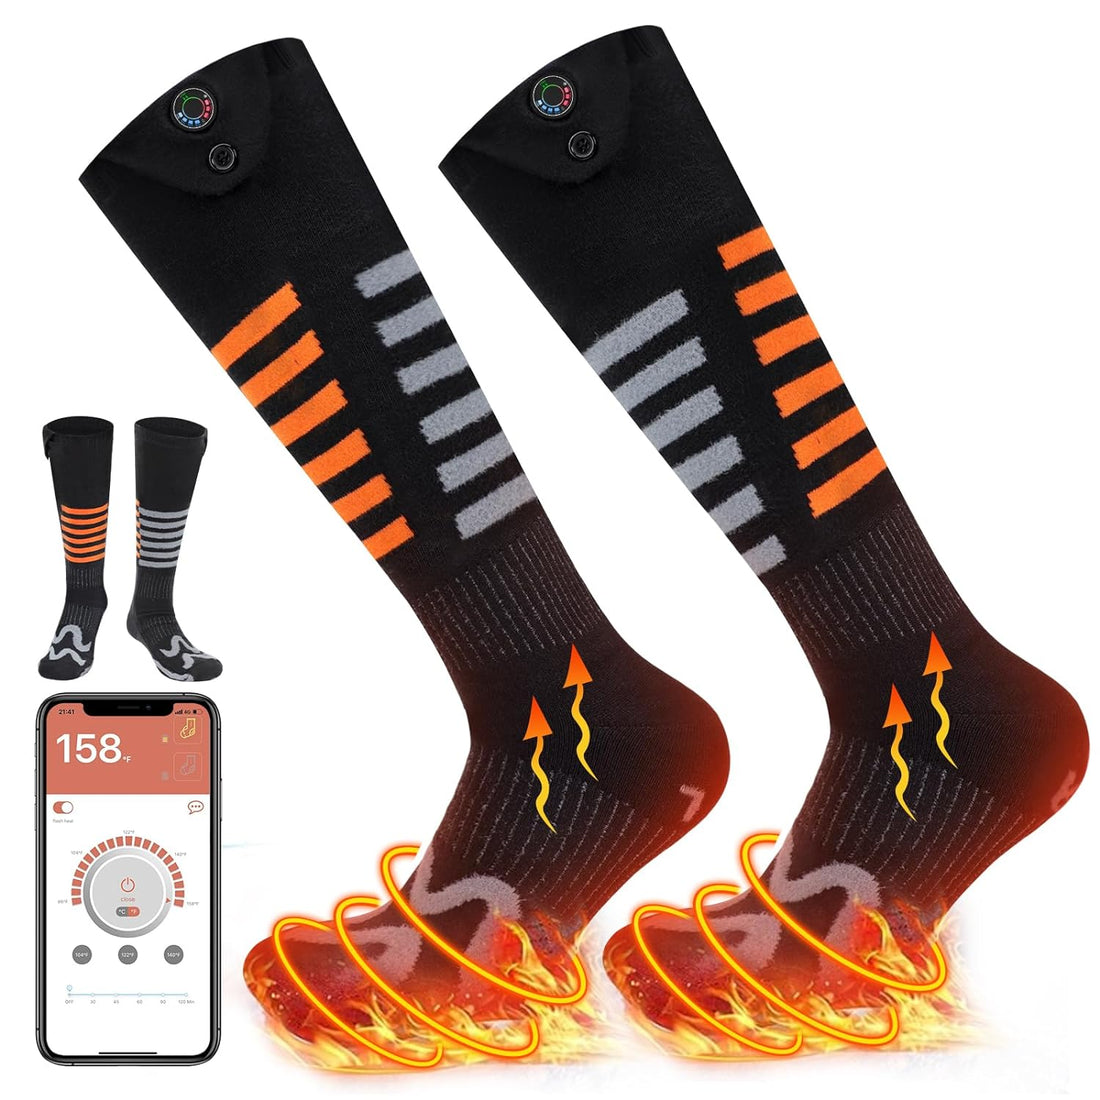 Heated Socks for Men Women - Electric Socks for Men Rechargeable Battery Heating Socks Unisex Foot Warmers Heat Socks-Winter Warm Thermal Socks for Outdoor Riding Camping Hiking Motorcycle Skiing